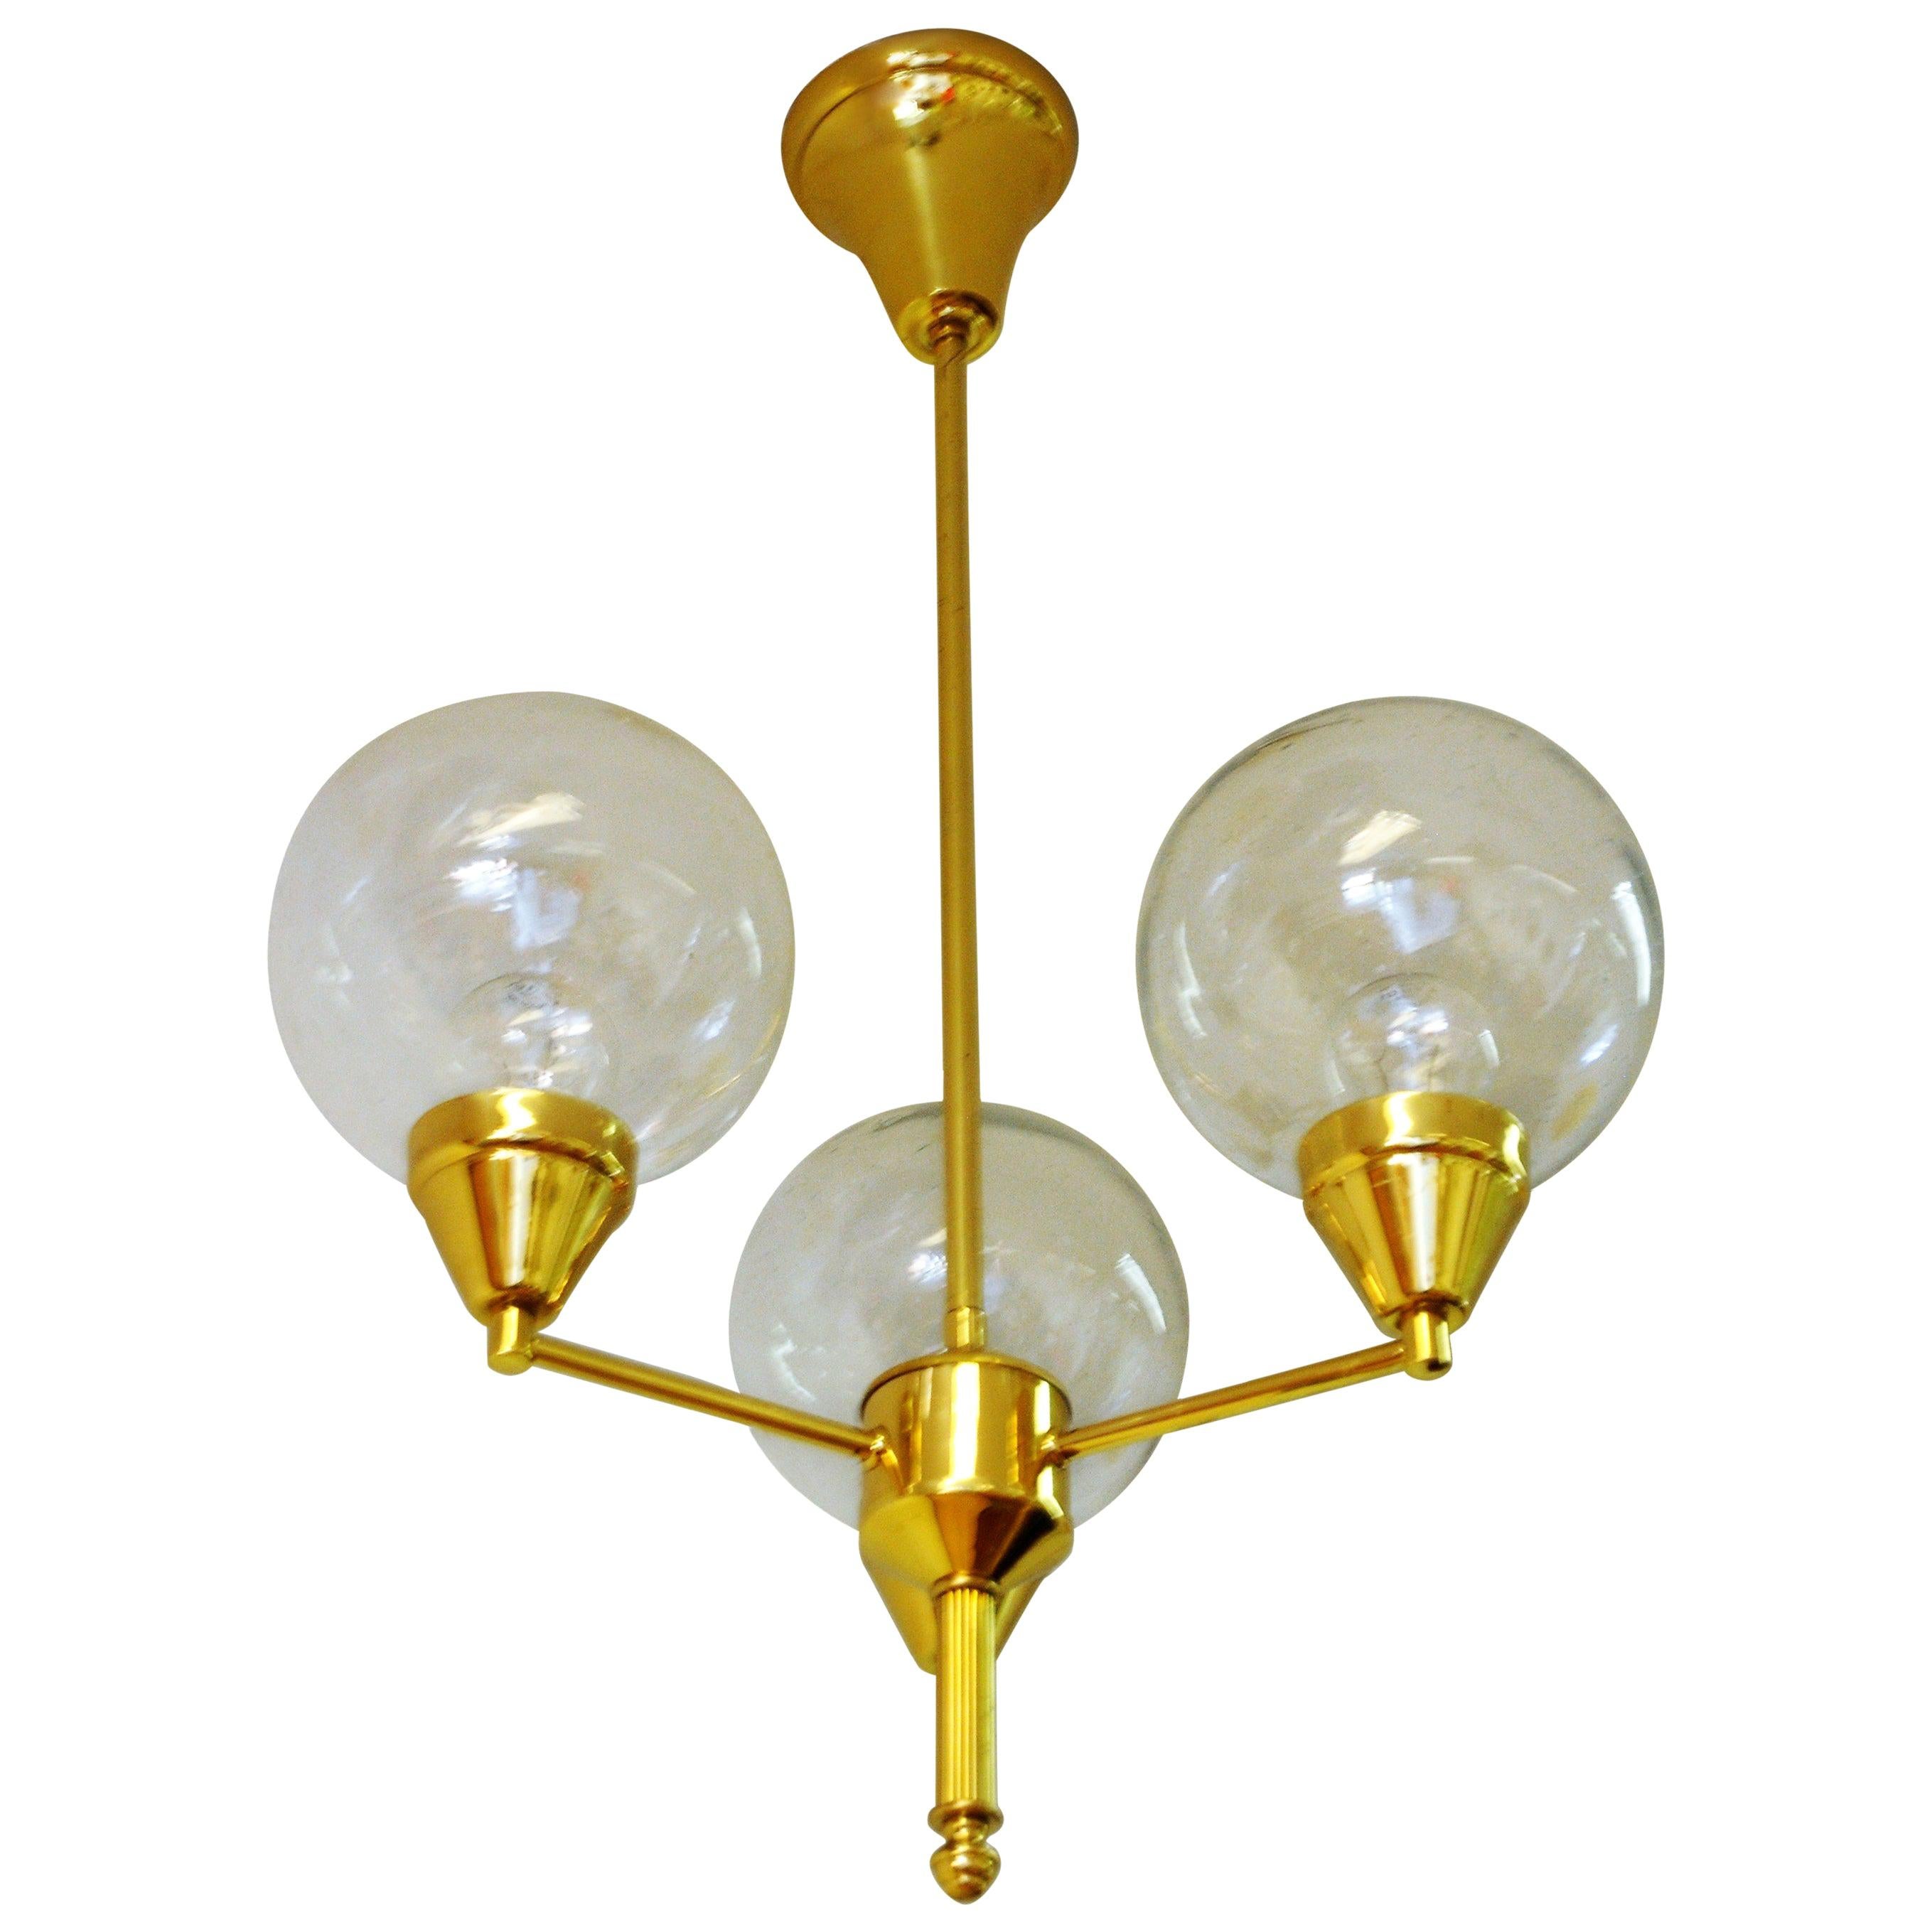 Brass Ceiling Lamp with Three Clear Glass Domes 1960s, Sweden